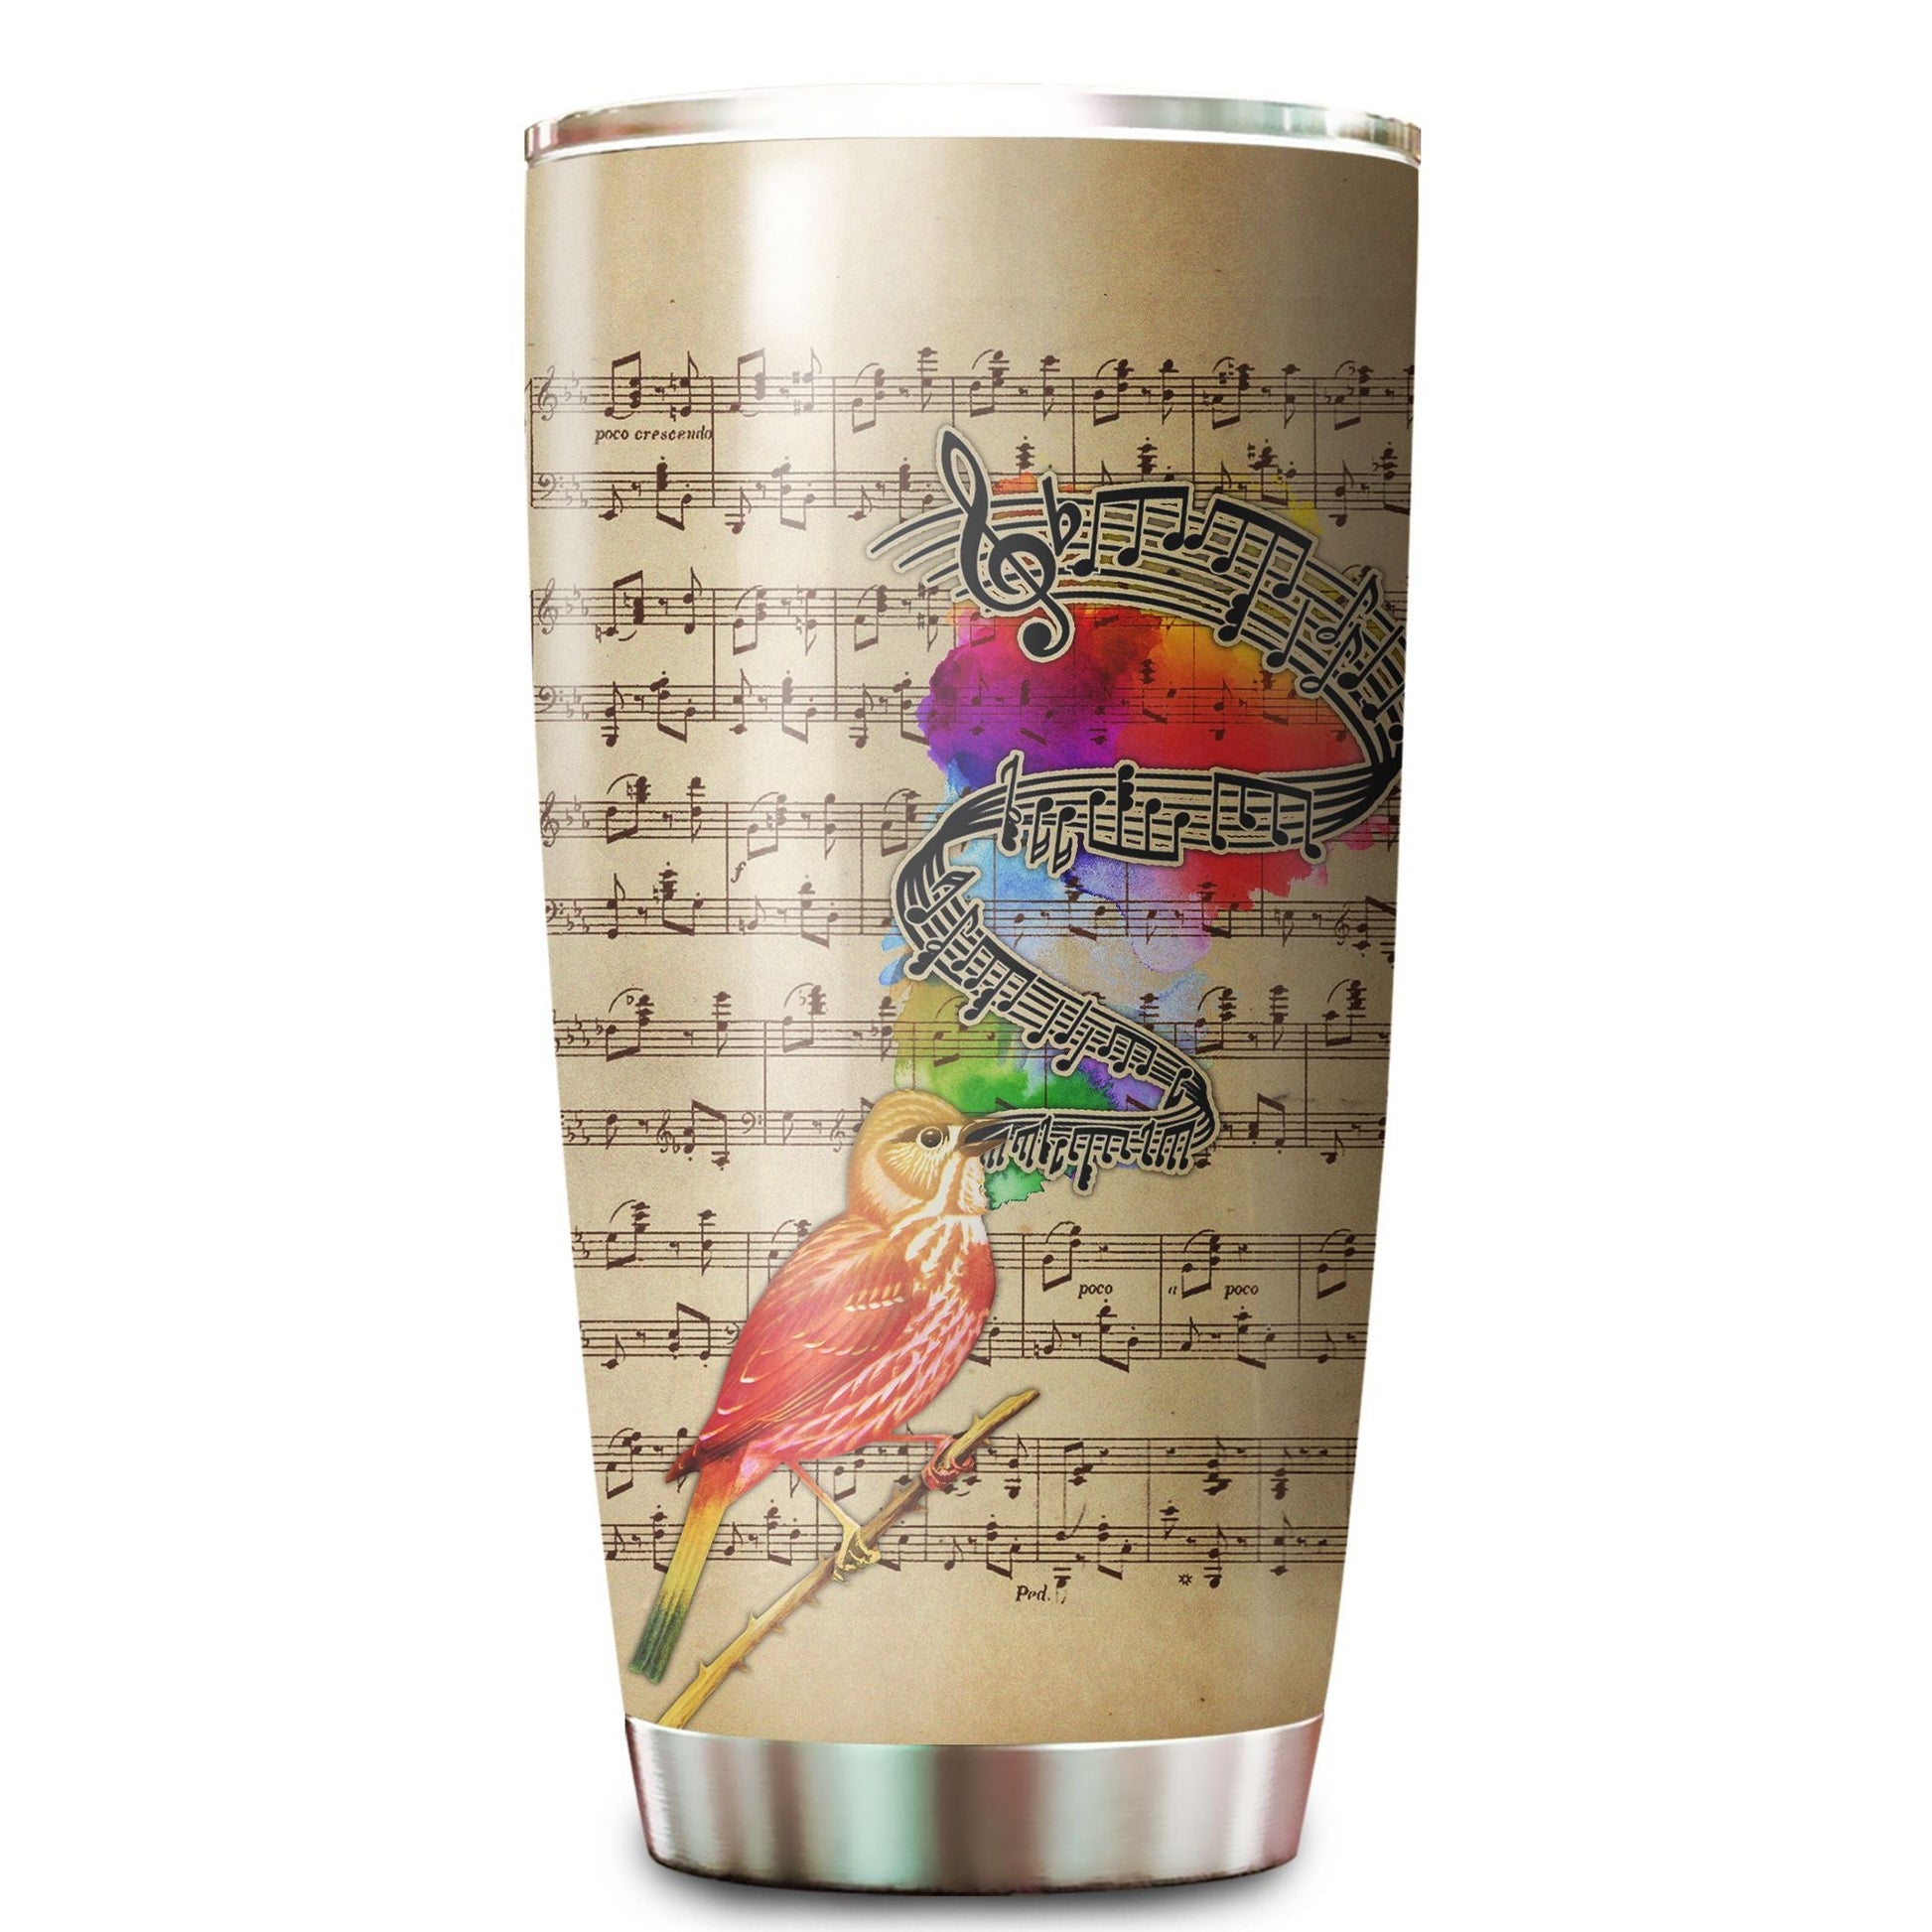 Unifinz LGBT Tumbler Cup 20 oz Bird I Am Brave I Am Bruised This Is Me Tumbler LGBT Travel Cup 2022